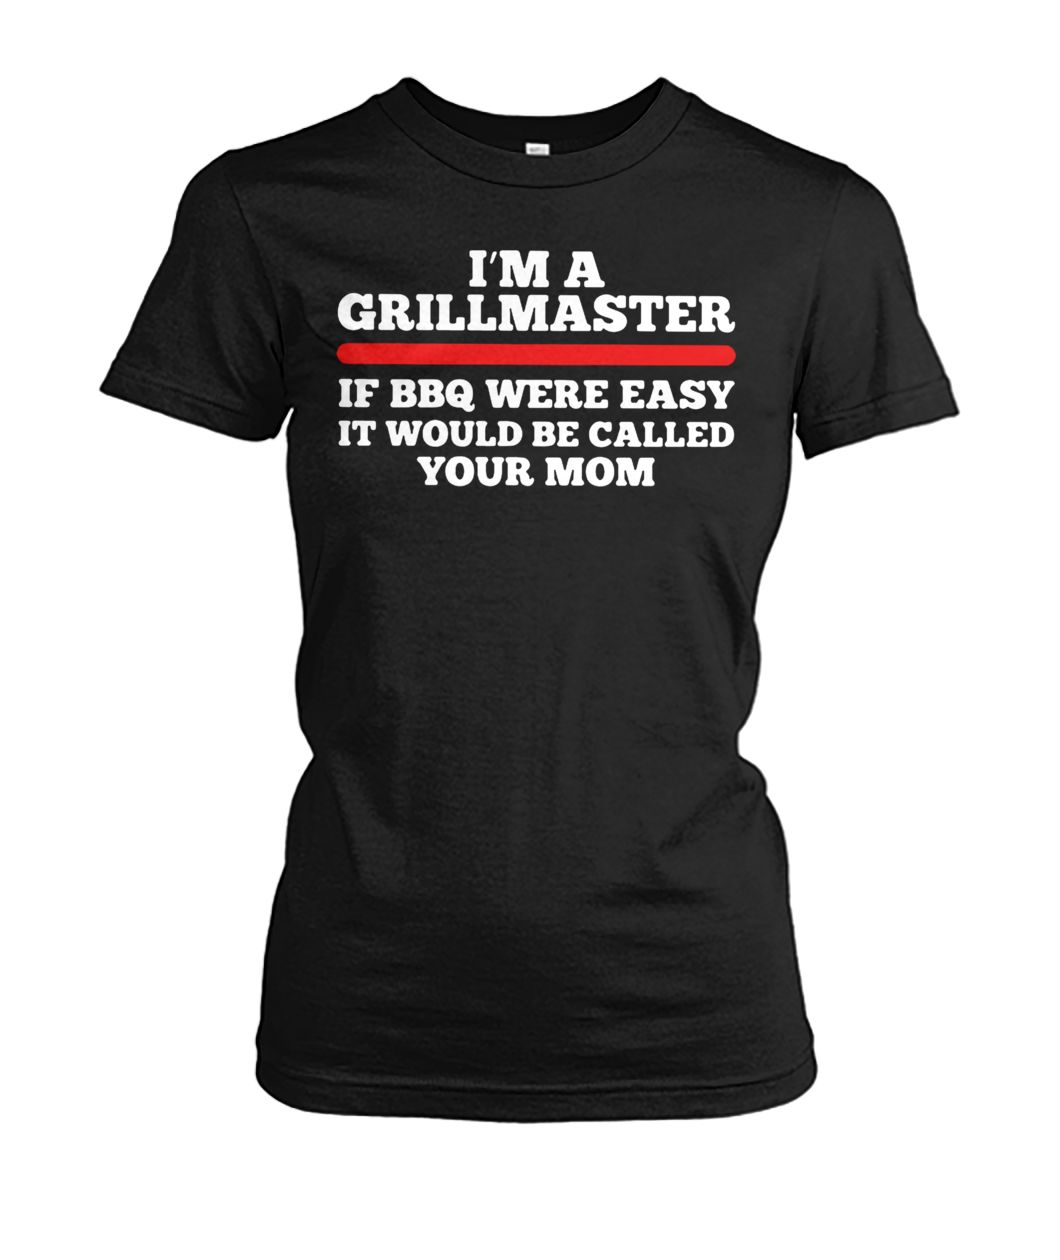 I'm a grillmaster if bbq were easy if would be called your mom women's crew tee